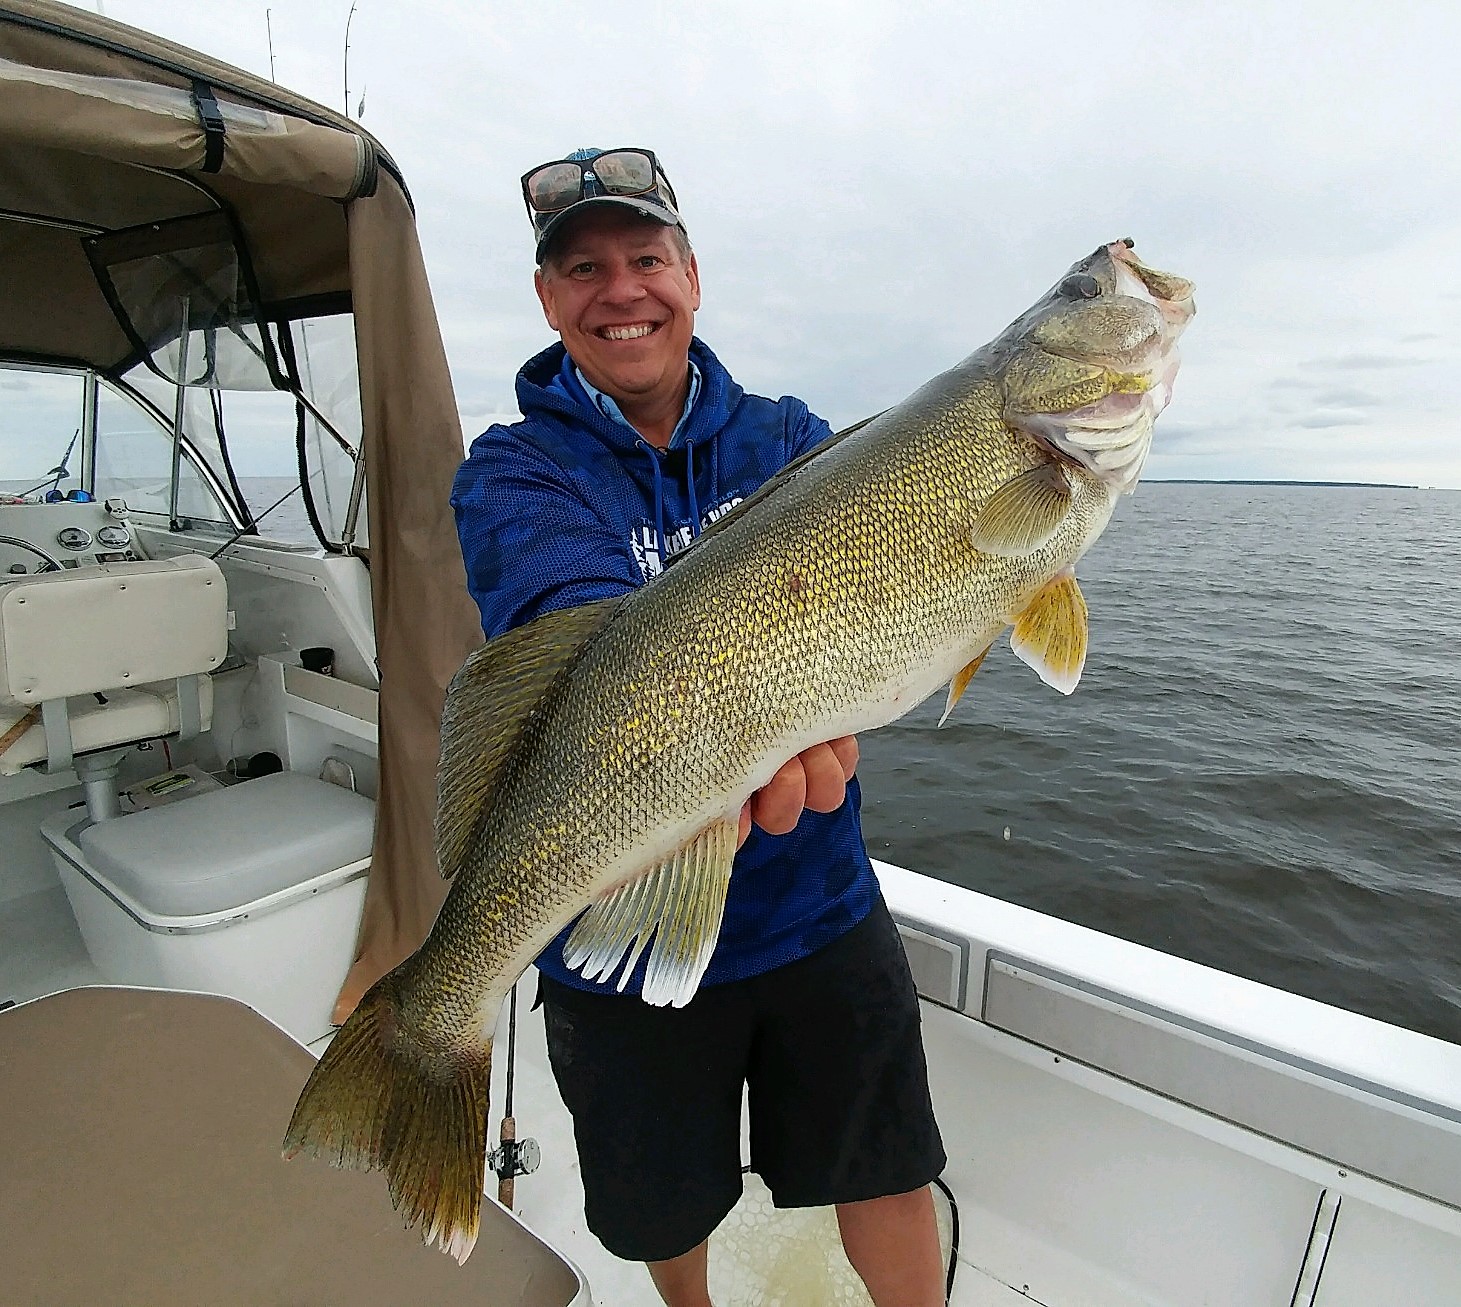 Fishing/ Catch Walleye with a Kayak, trolling with crawler harness and 